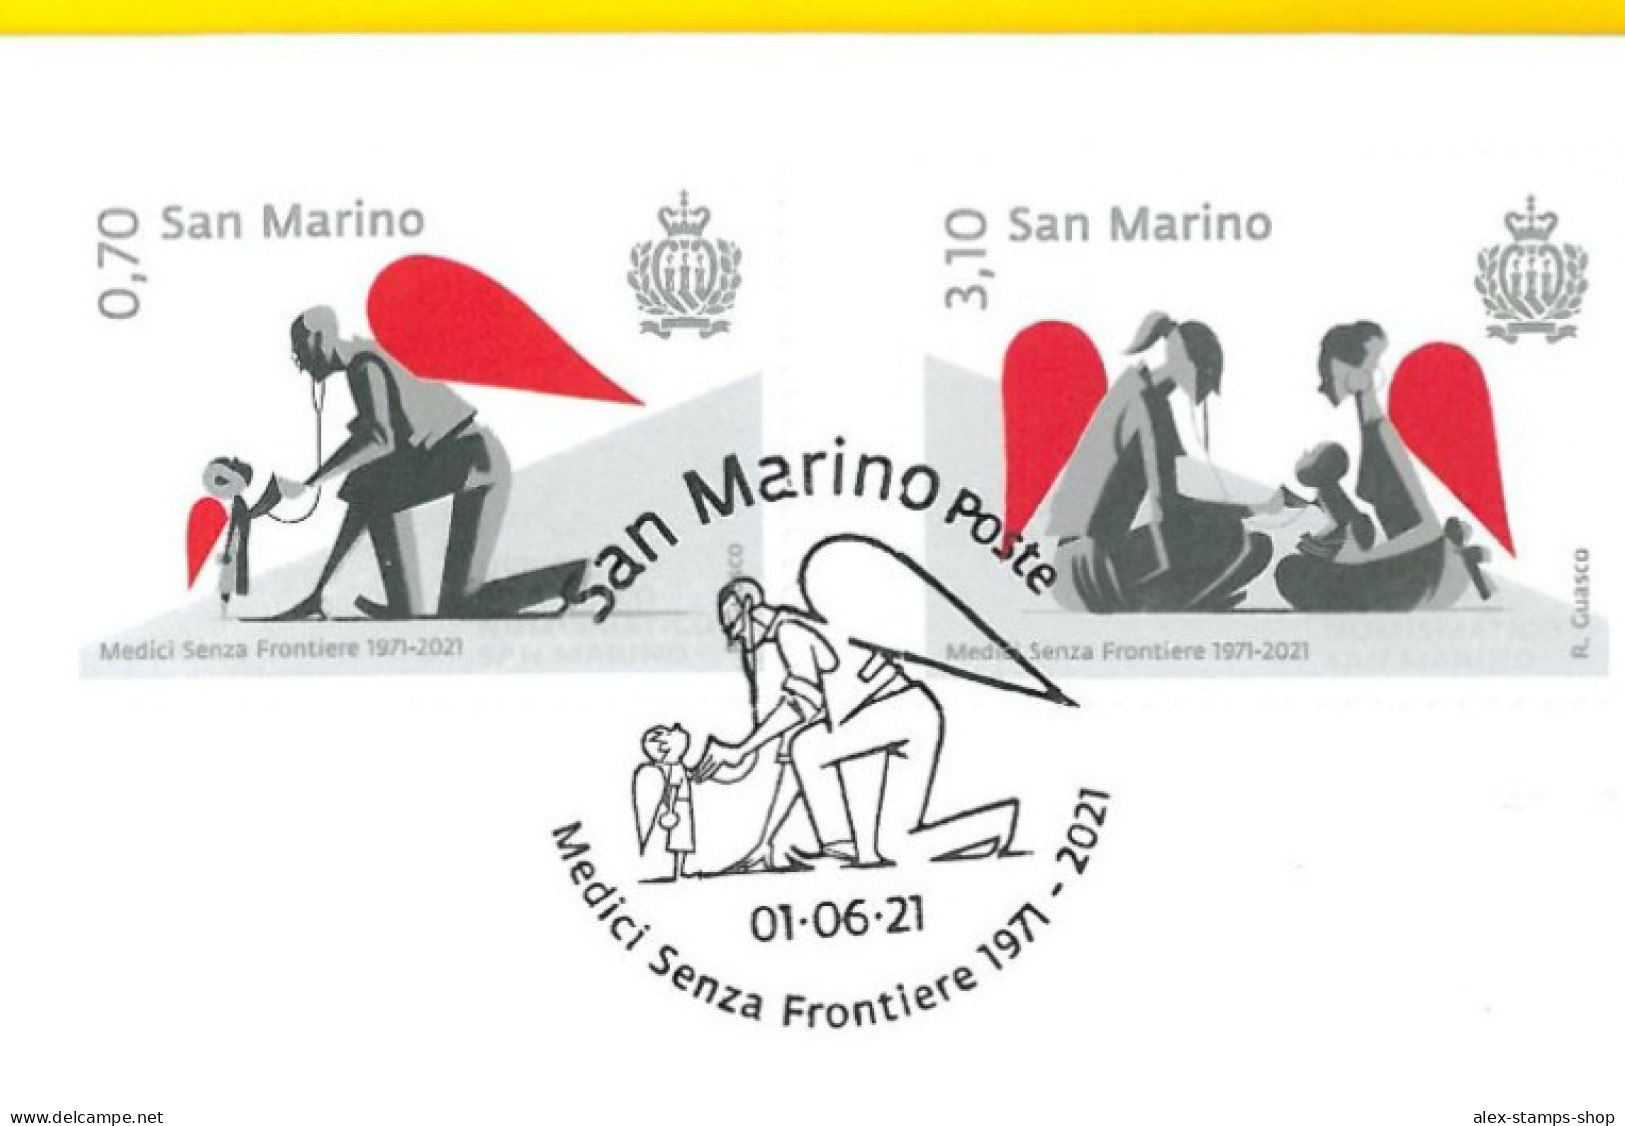 SAN MARINO 2021 FDC 50° Aniversary Medici Senza Frontiere - FIRST DAY COVER - FDC